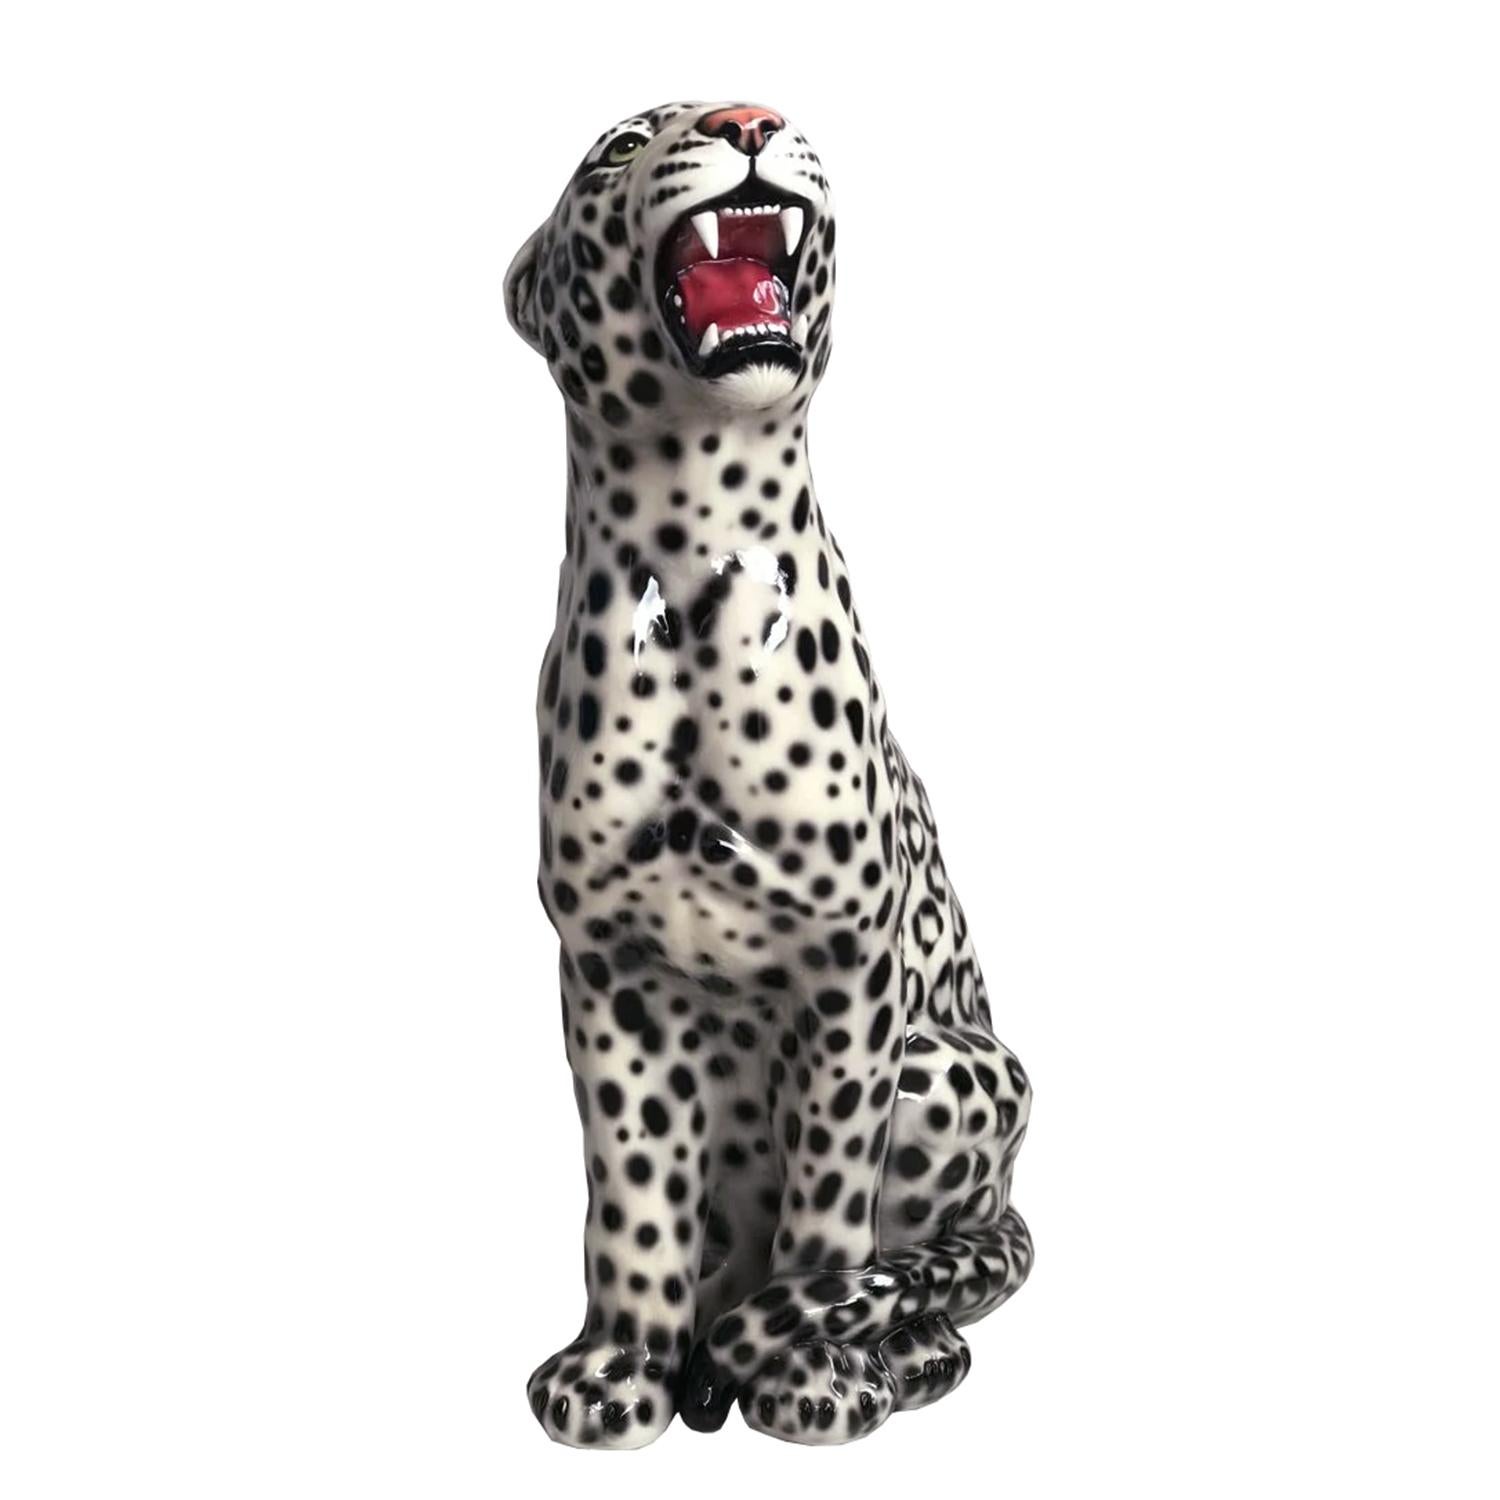 Sculpture leopard black and white right.
All in hand-crafted ceramic made in Italy.